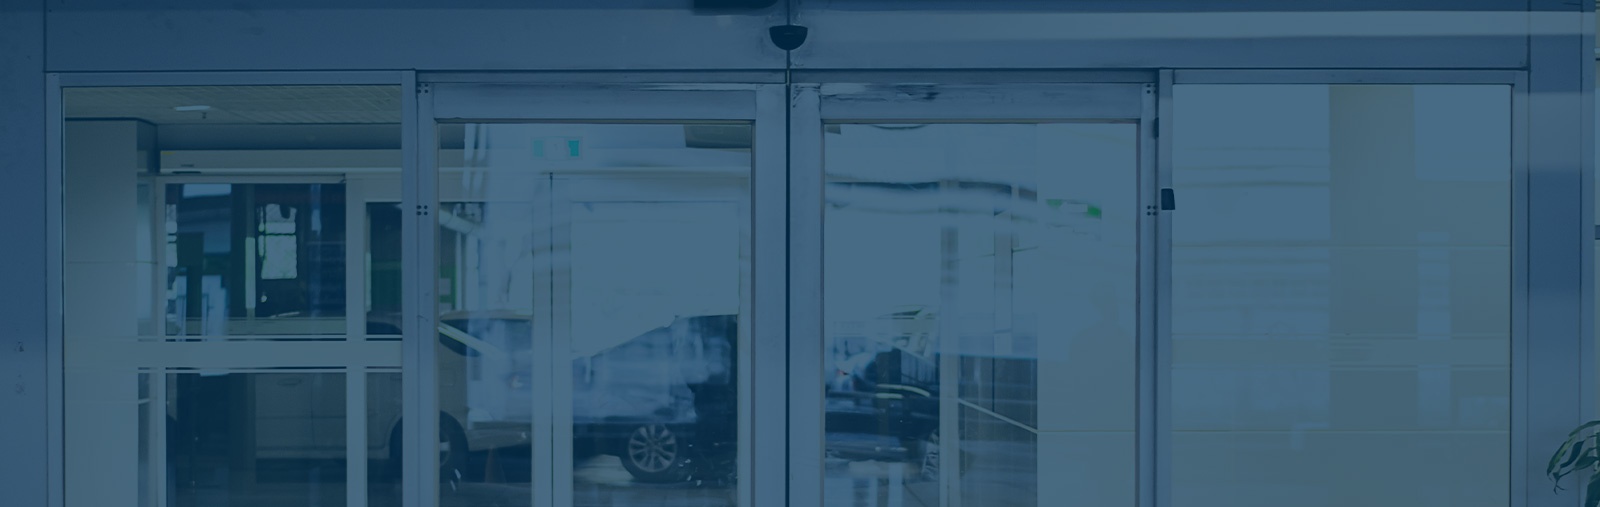  Access Control, Automatic Doors & Security Camera Installation in Barrie, ON